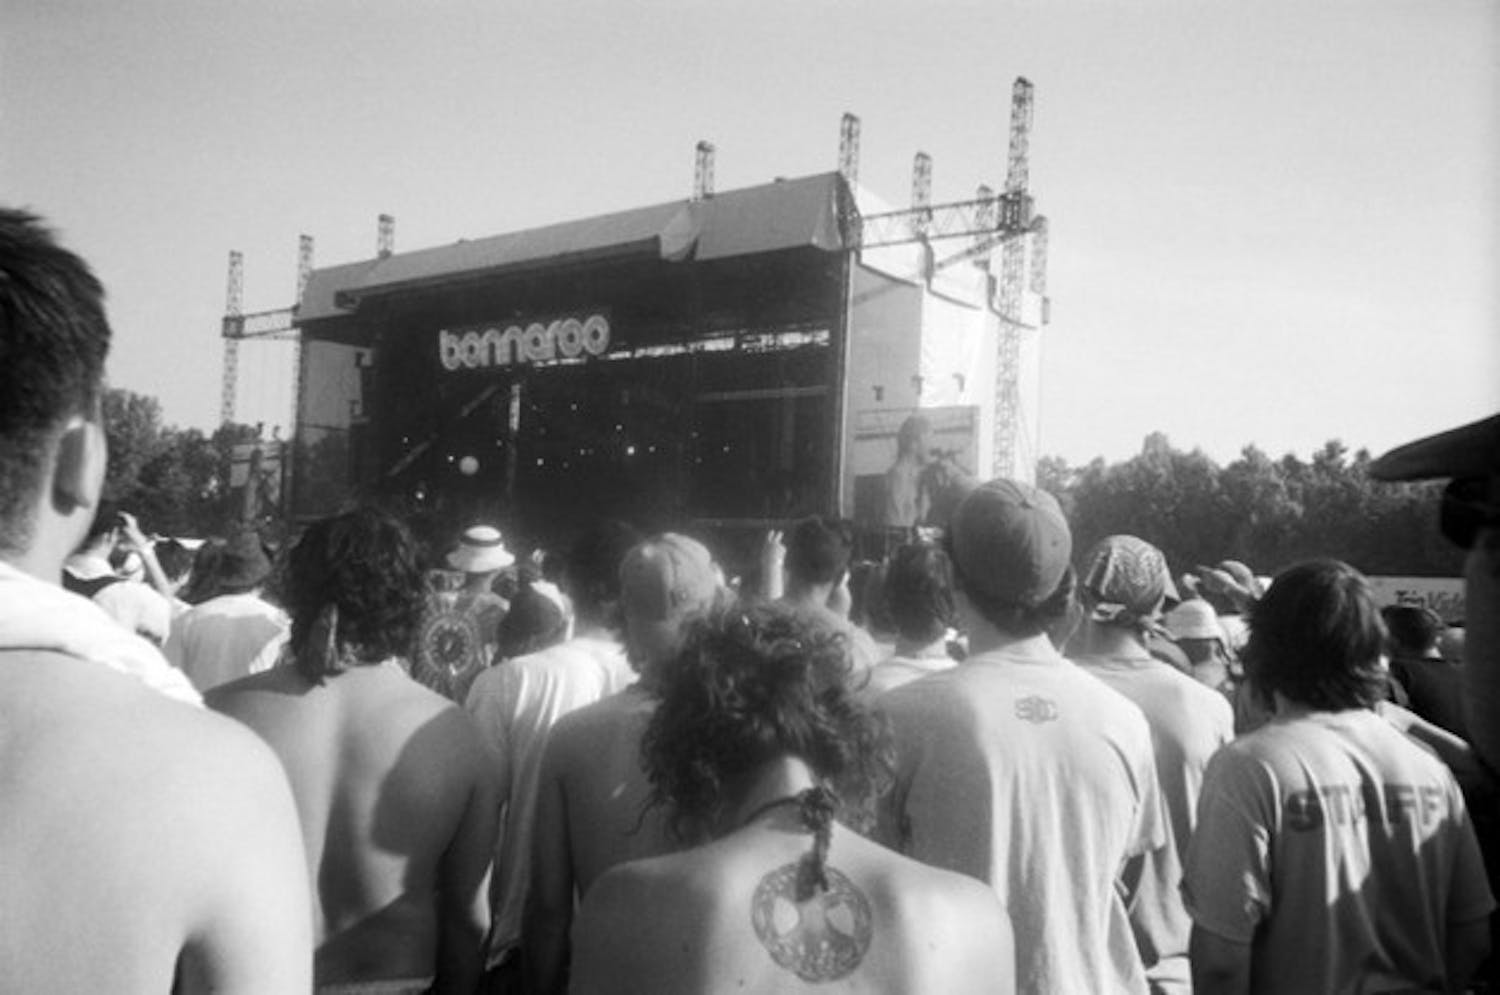 Many Dartmouth students ventured south to the Bonnaroo Music Festival.